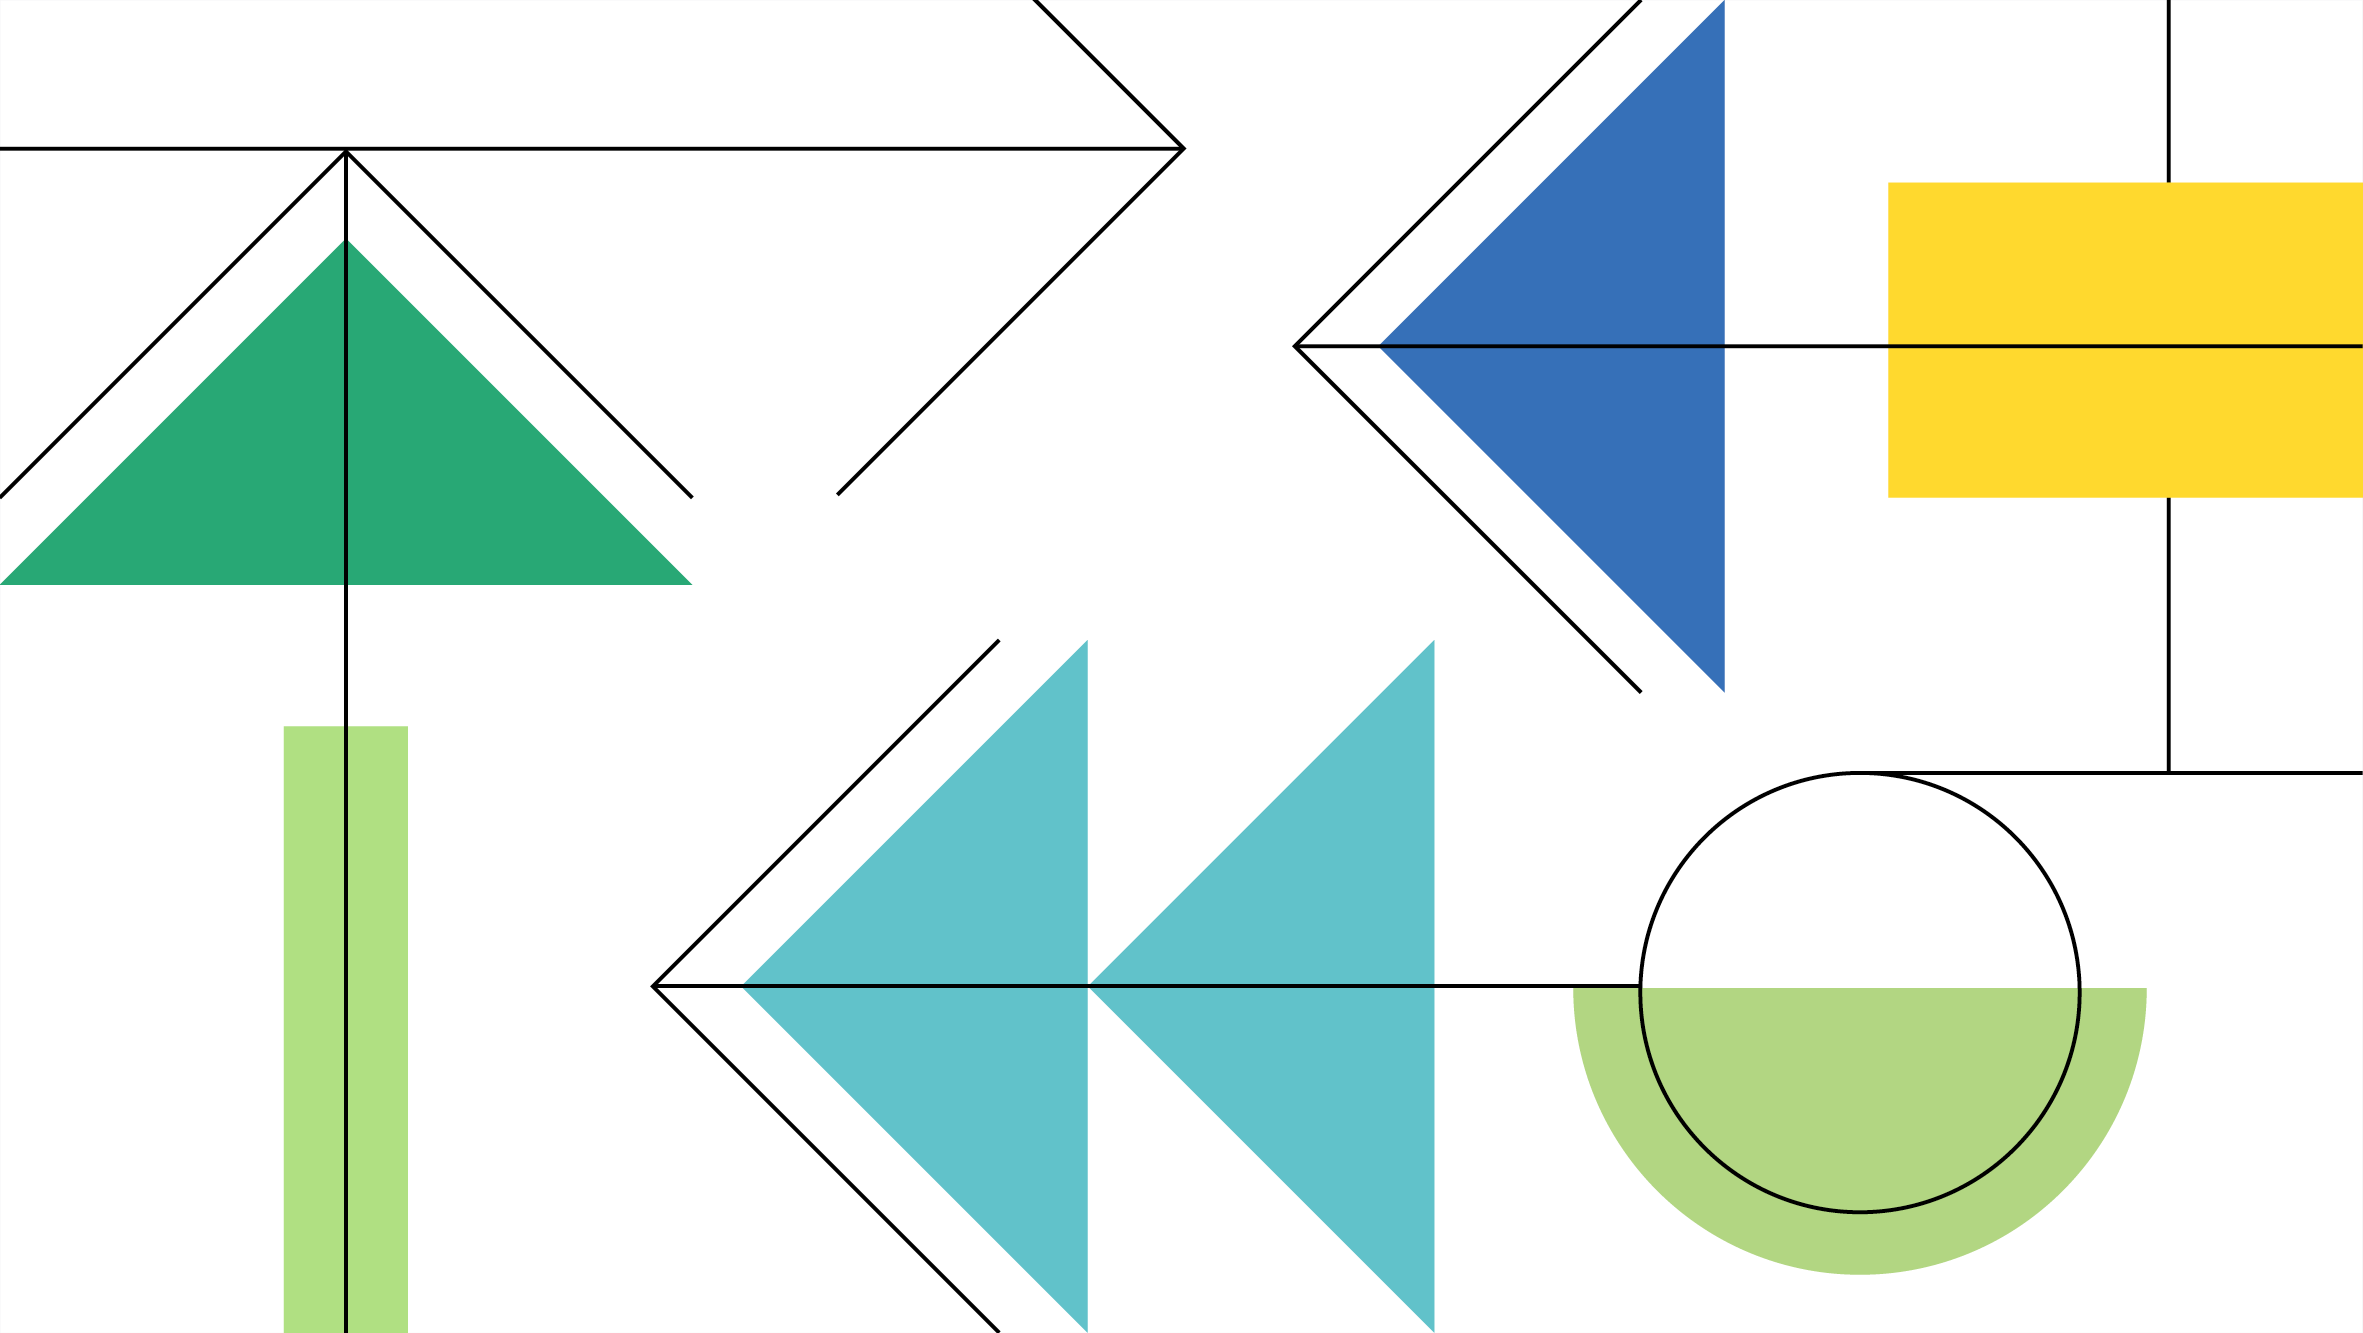 Abstract image with green and blue rectangles, triangles, and arrows.